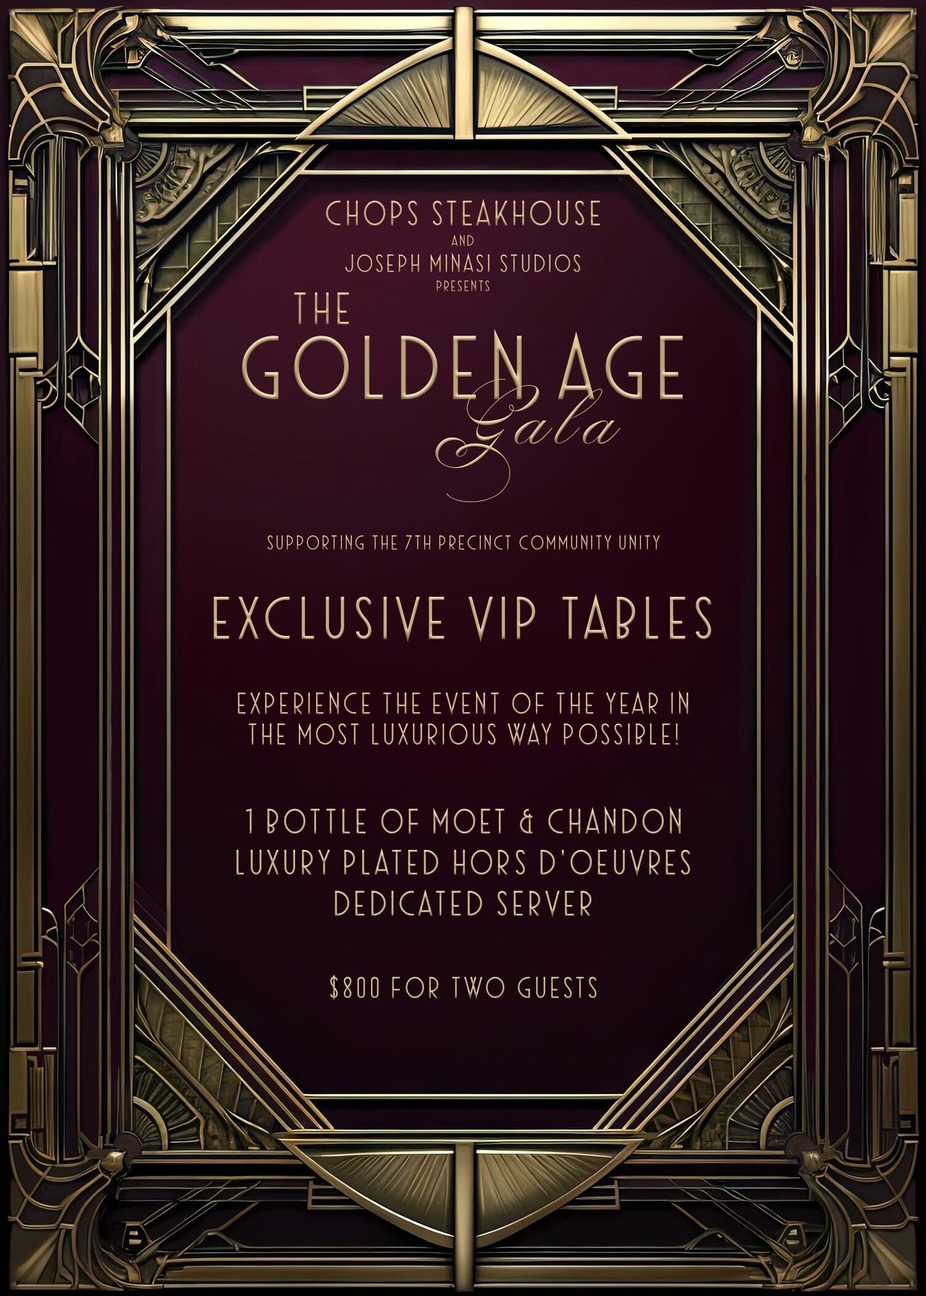 The Golden Age Gala - VIP Table event photo